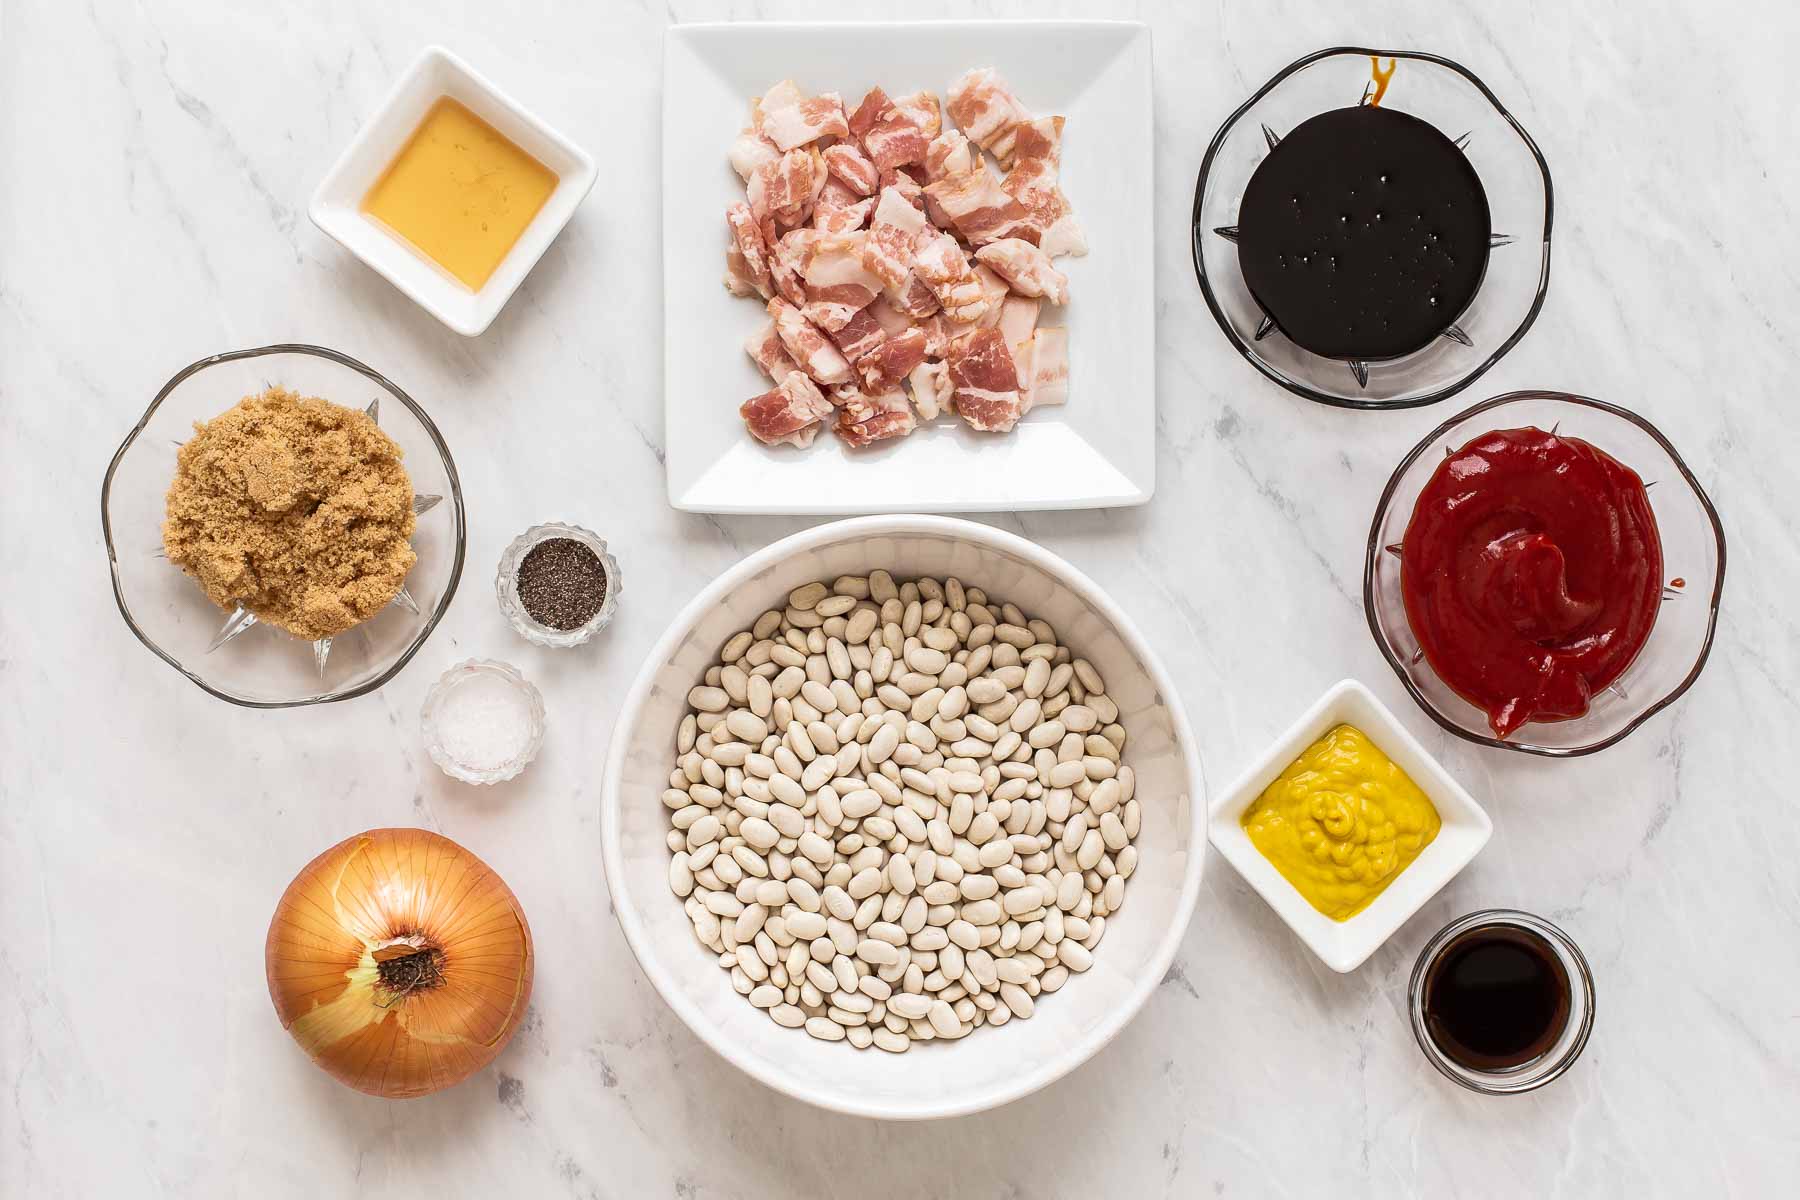 Ingredients for Boston Baked beans on table in small bowls.